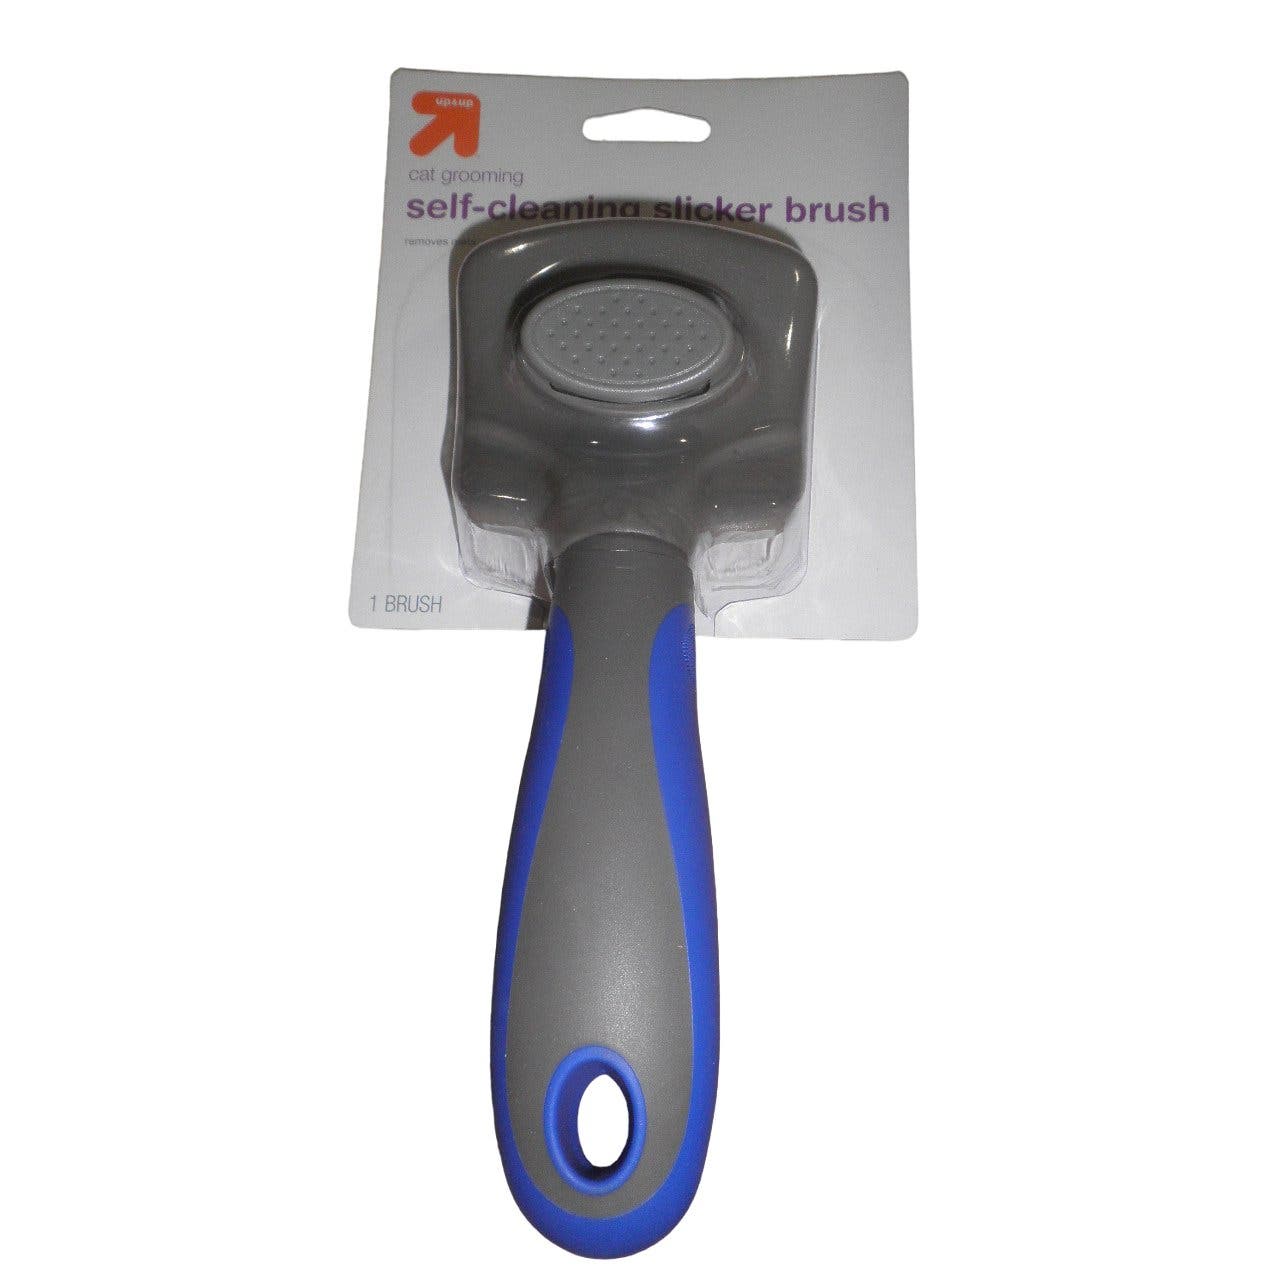 Up & Up Cat Grooming Slicker Brush, Self Cleaning Brush, For Cat Use Only